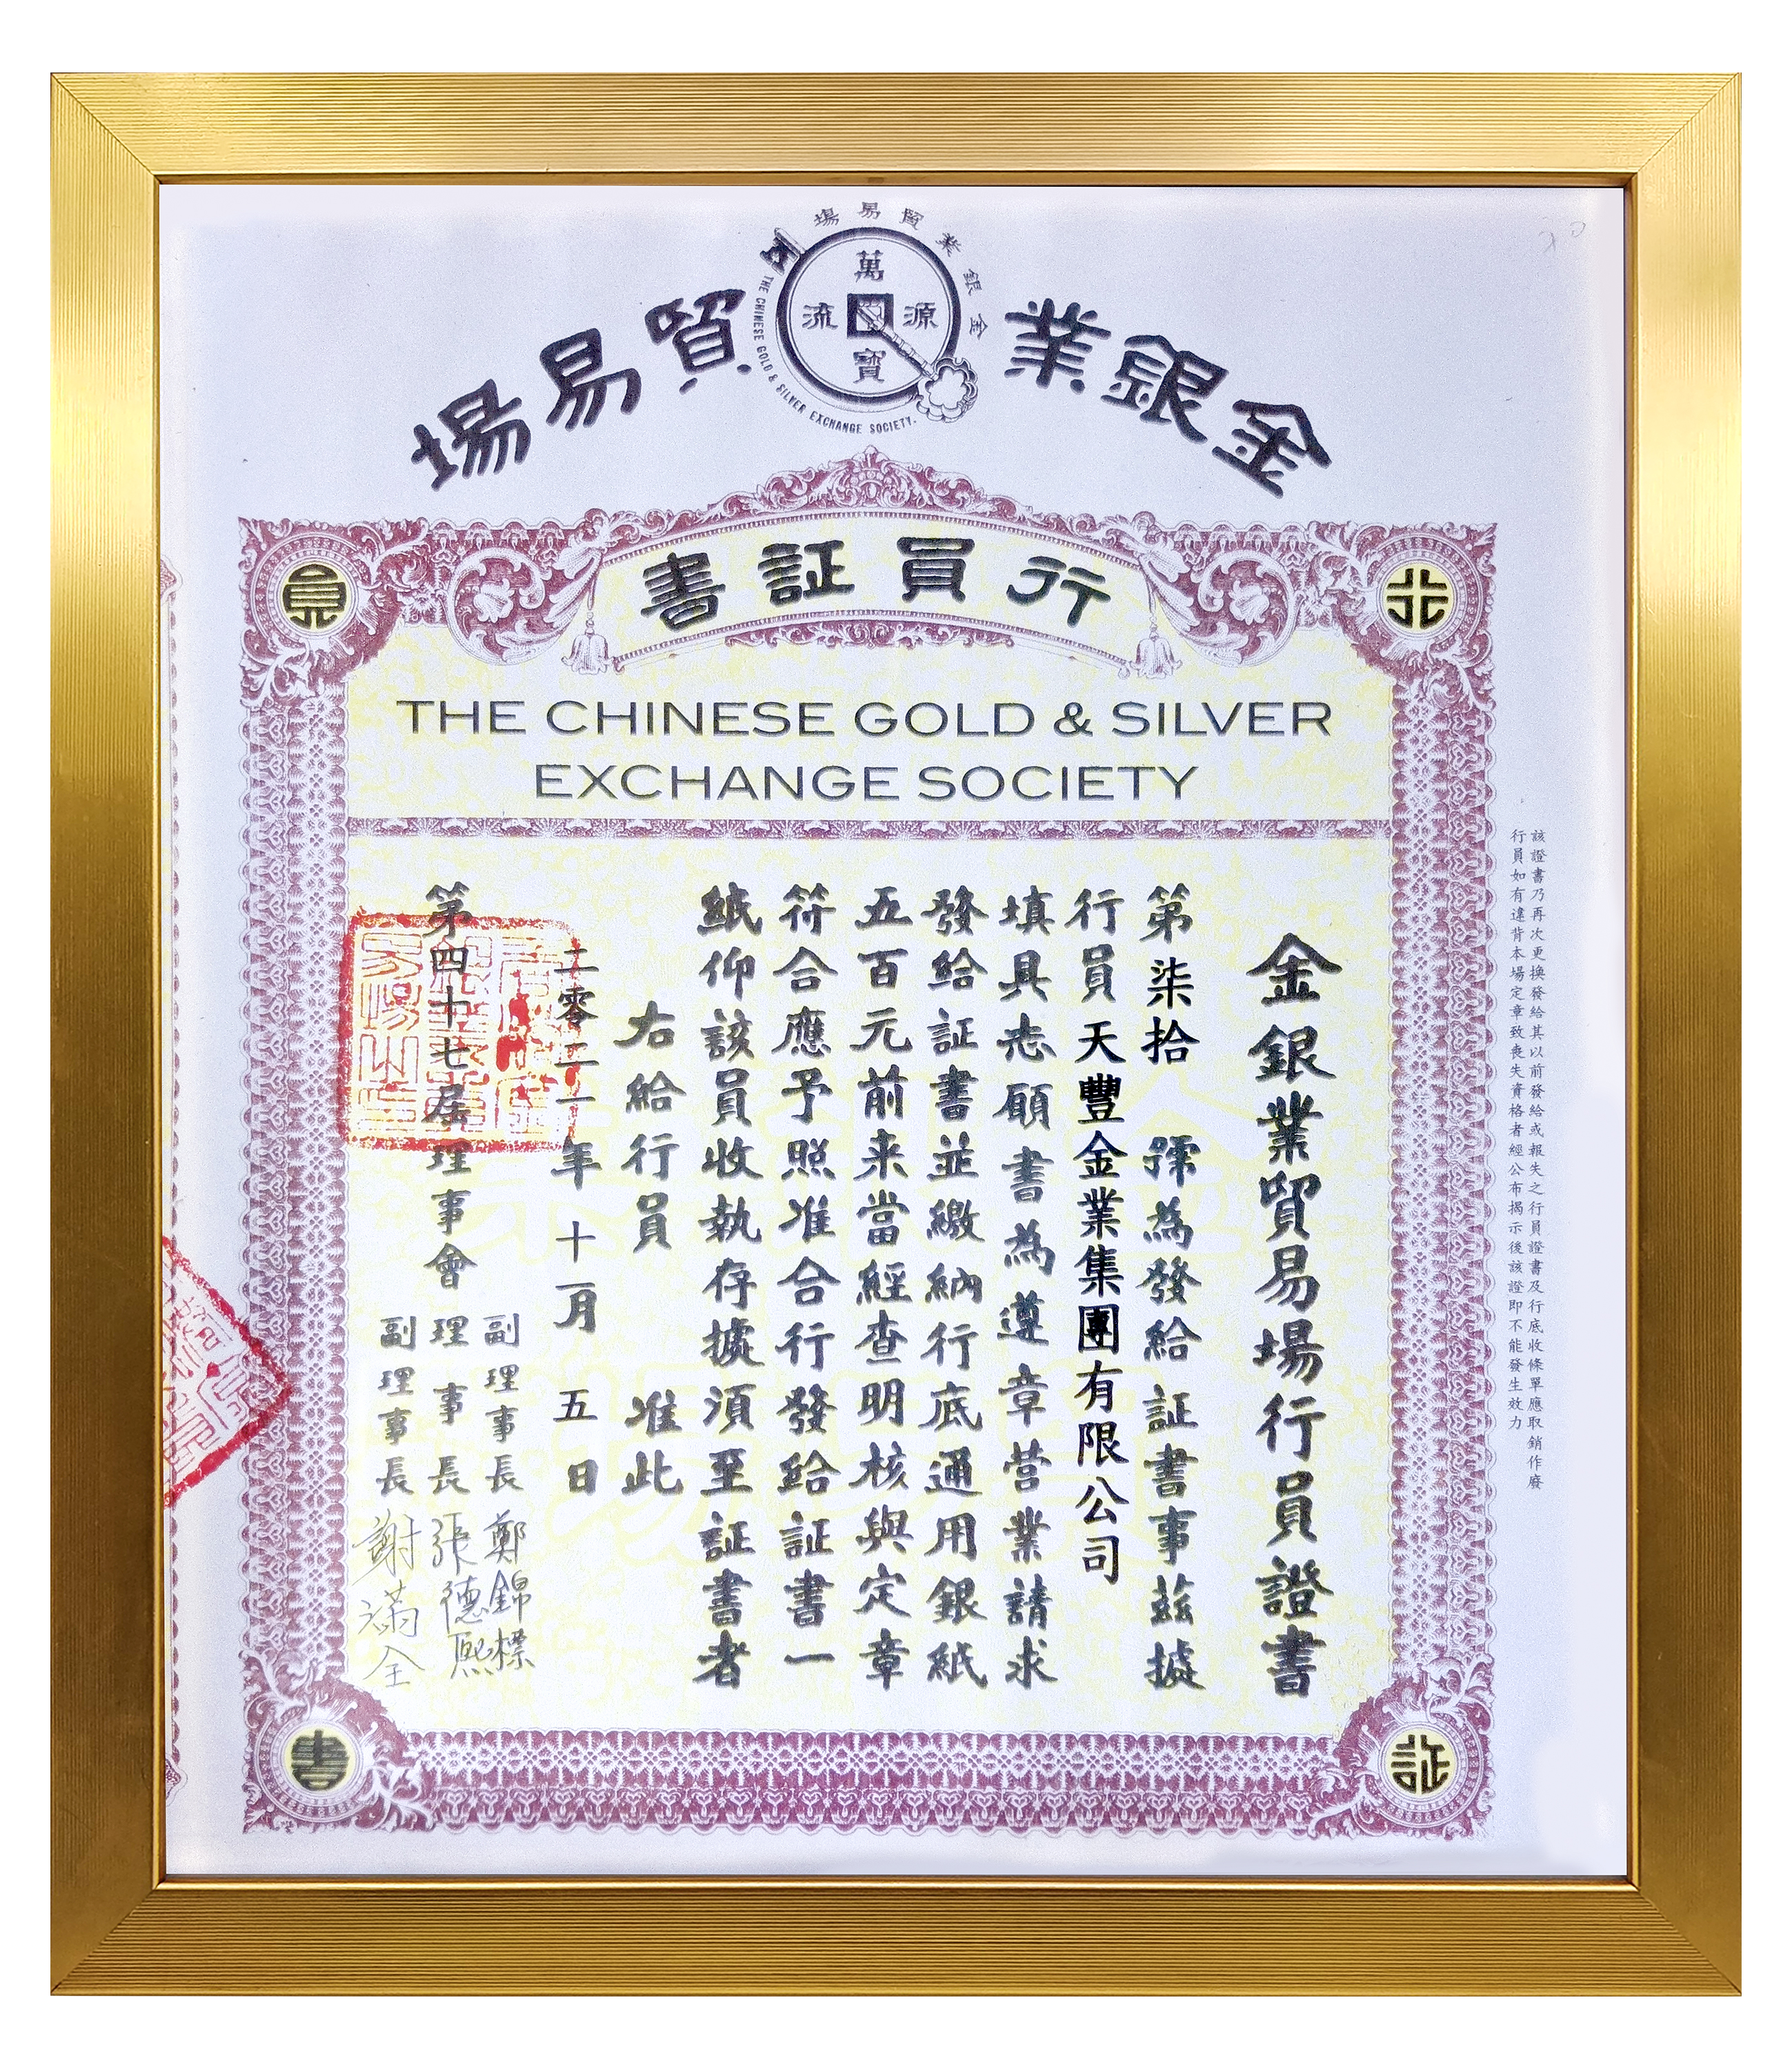 THE CHINESEGOLD & SILVER EXCHANGE SOCIETY